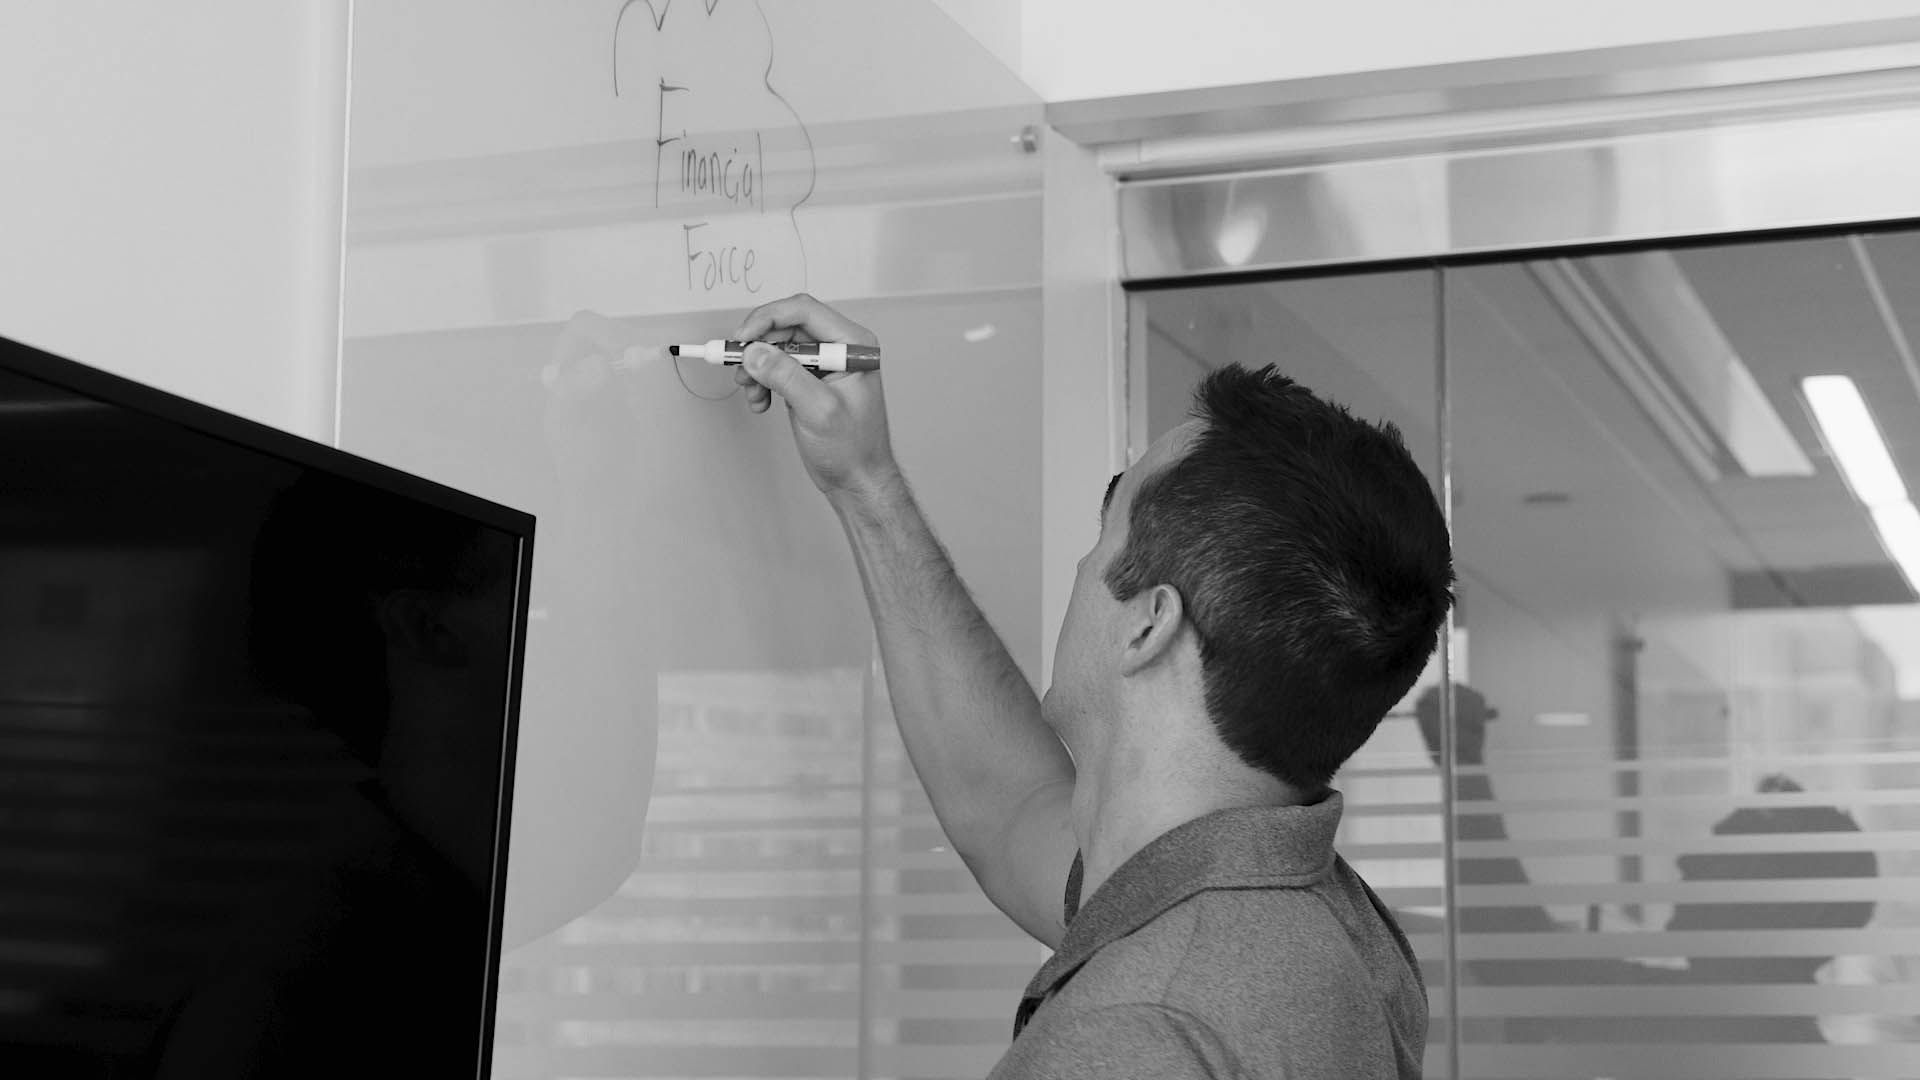 man drawing a diagram on a whiteboard